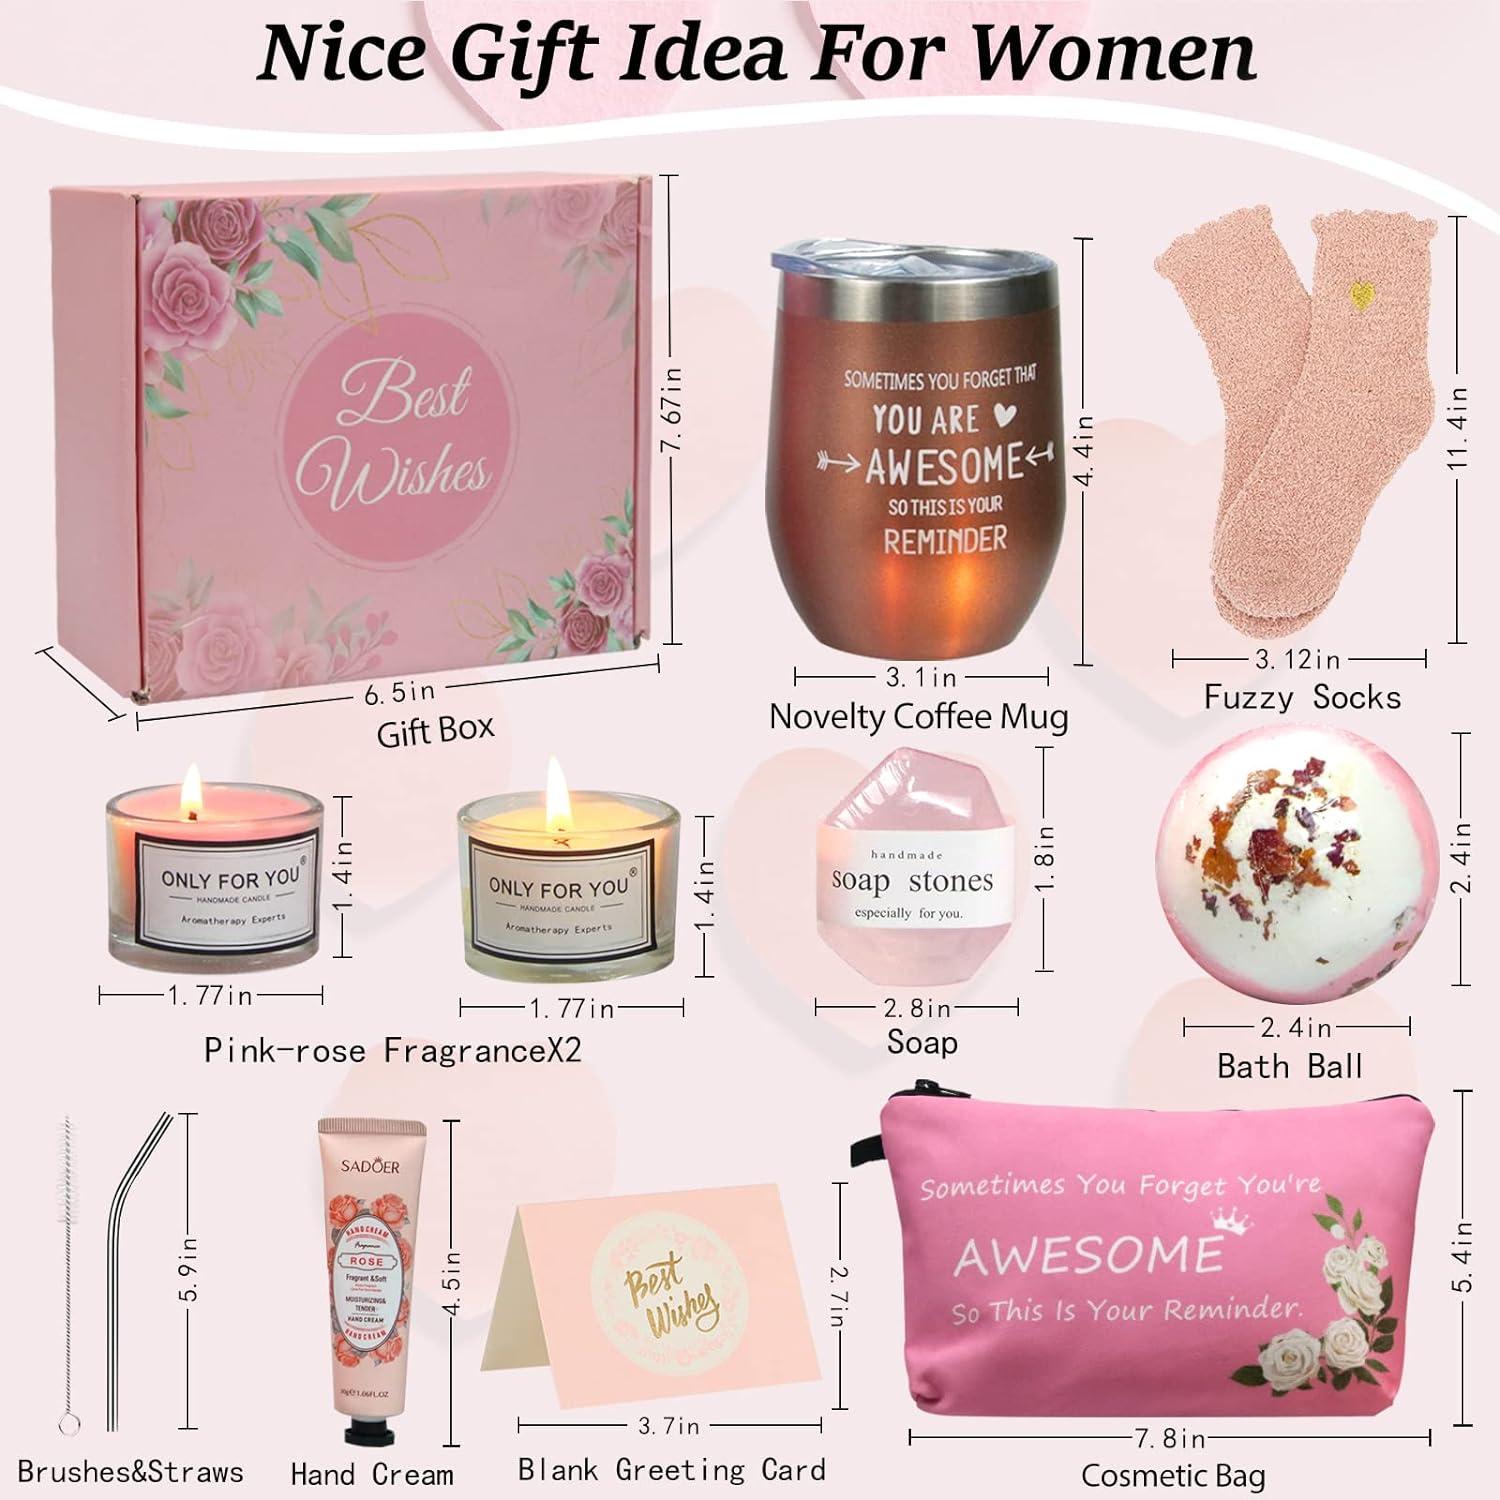 Gifts for Mom from Daughter Son - Best Mom Gifts, Funny Birthday & Mothers  Day & Thanksgiving & Christmas Gifts(Vanilla)